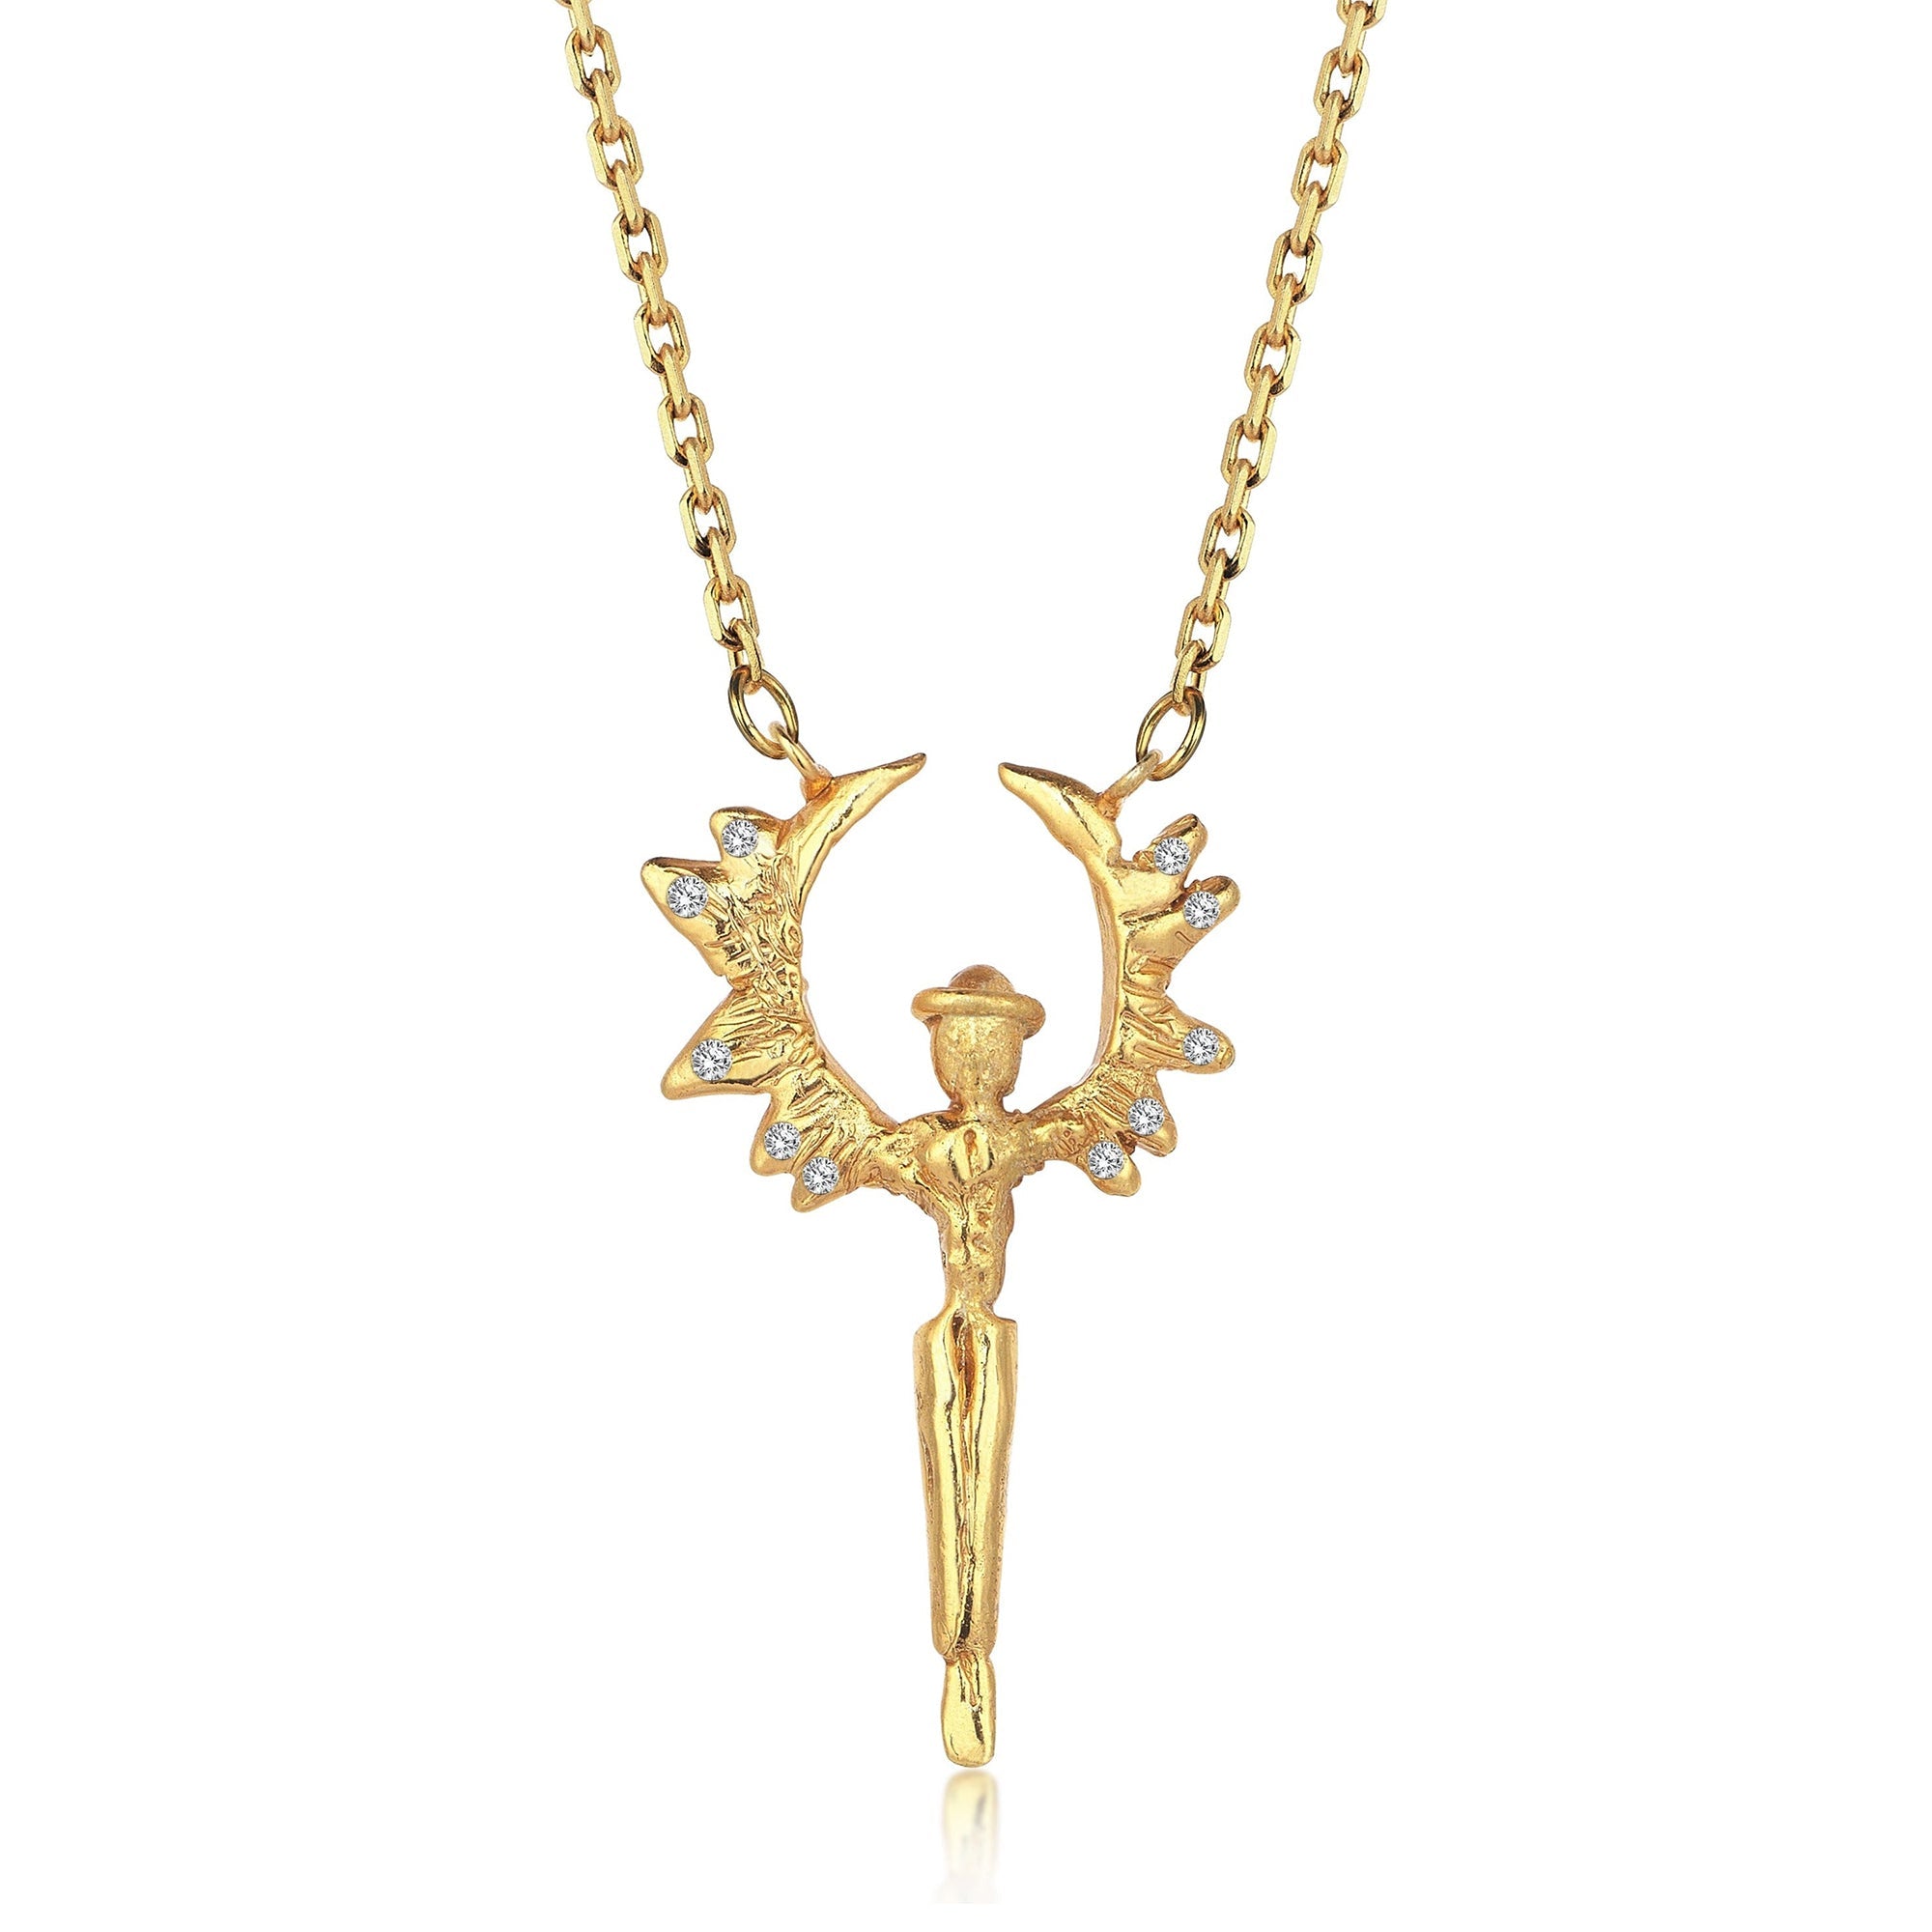 The Archangel Necklace